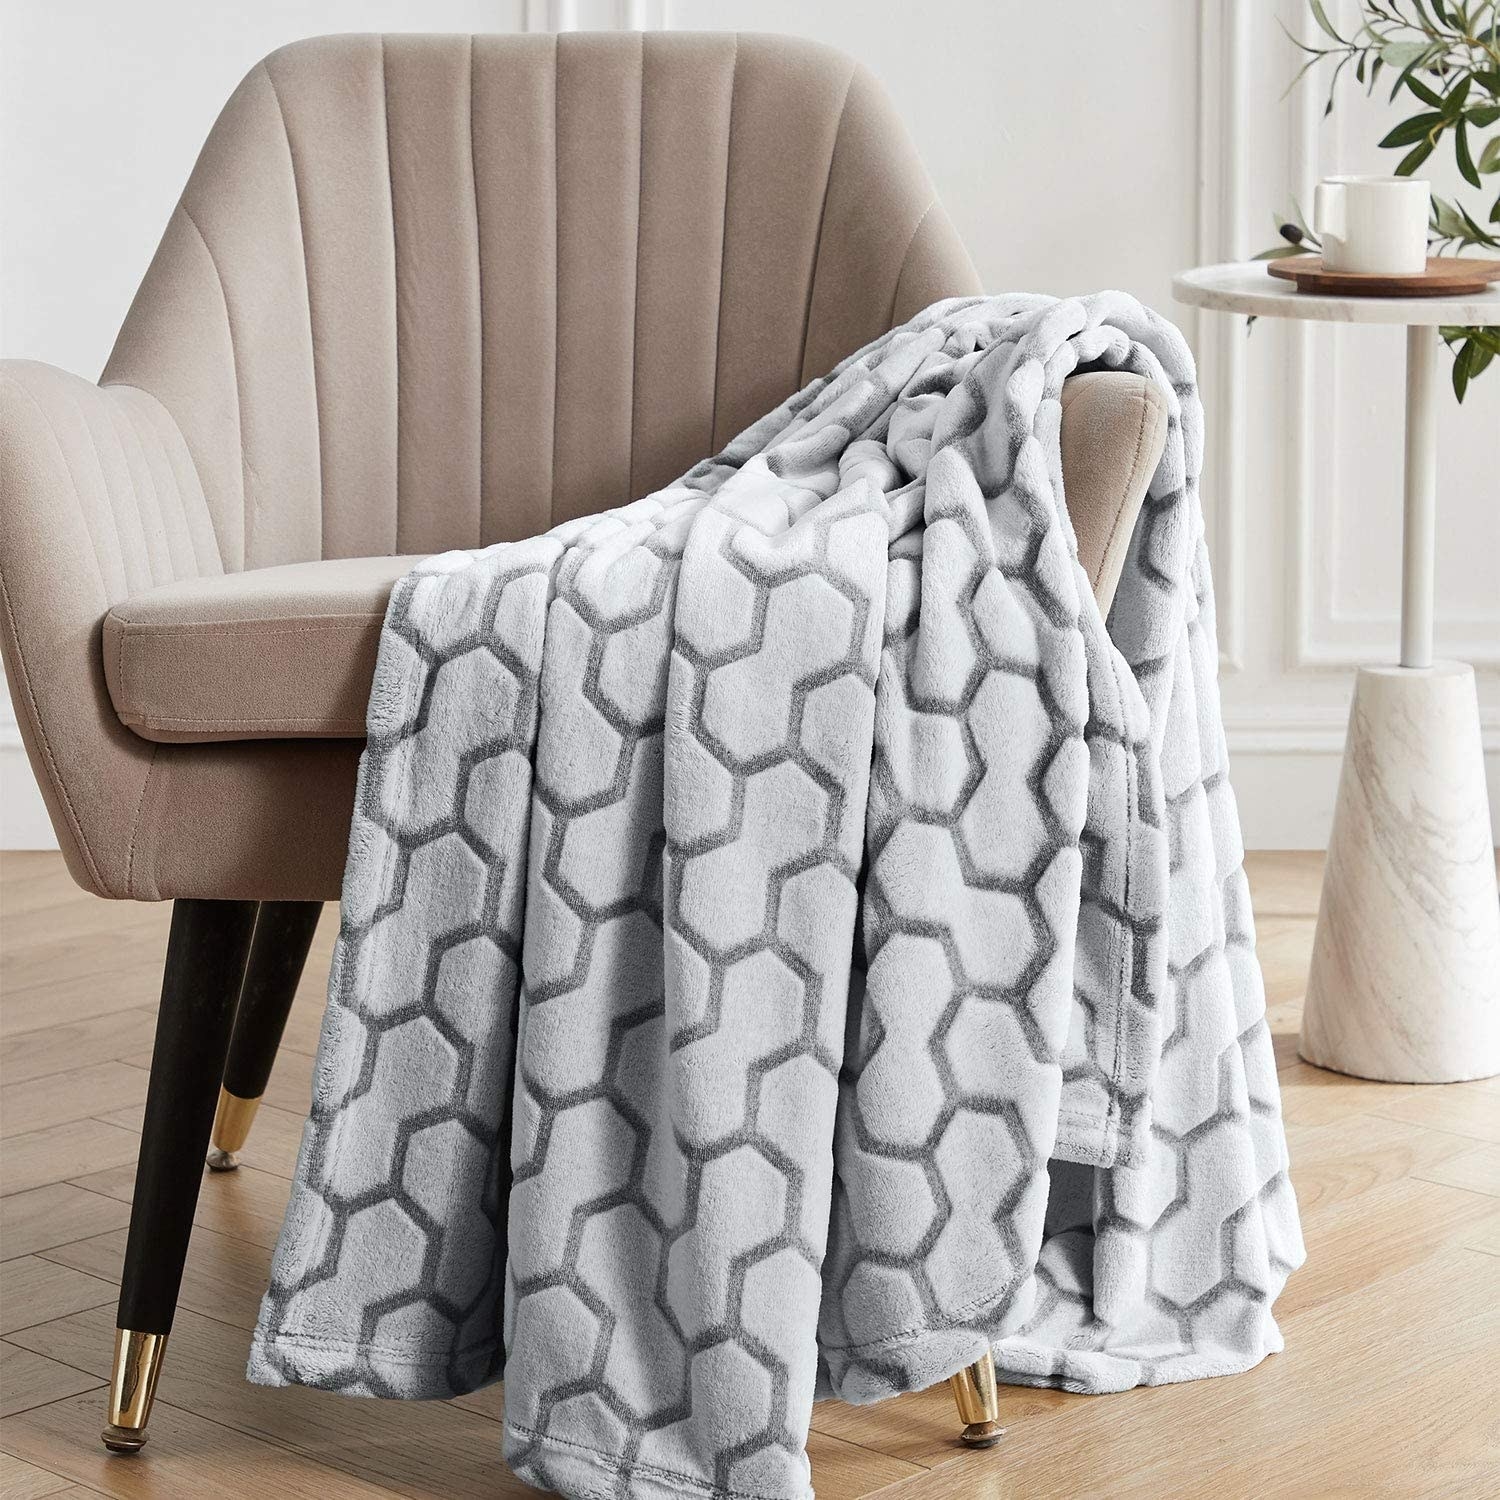 The throw blanket on a chair